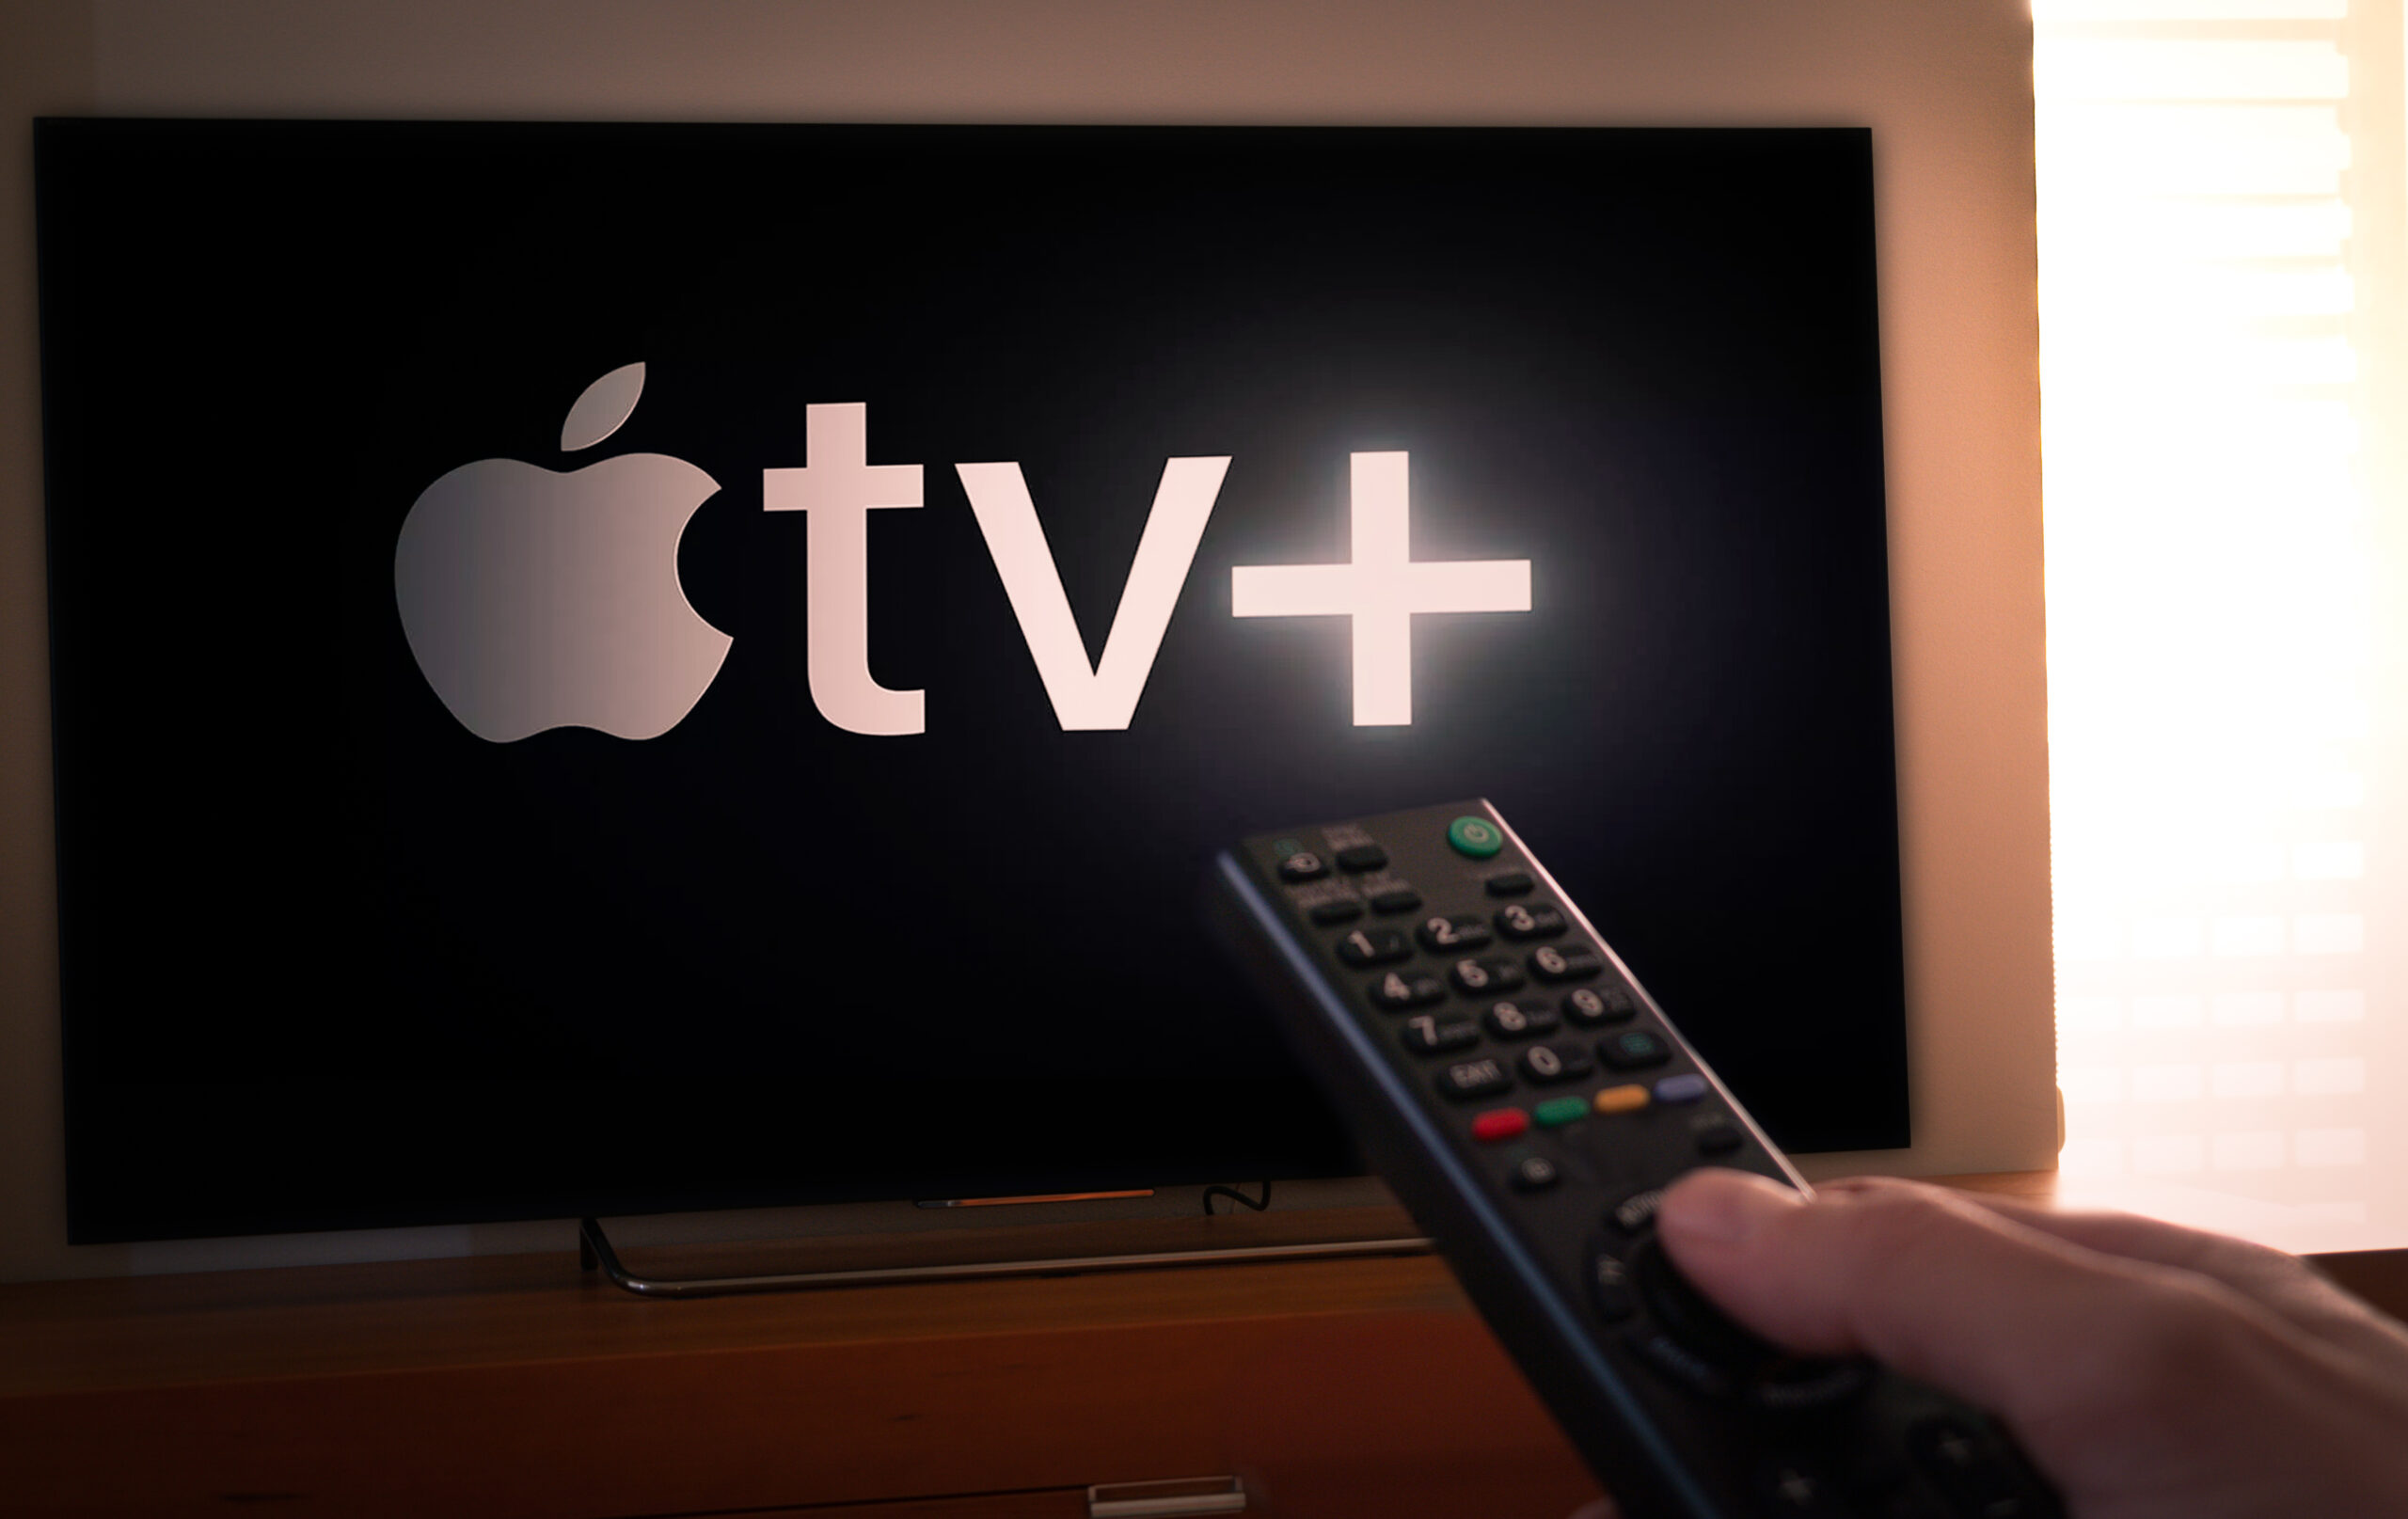 Geek insider, geekinsider, geekinsider. Com,, how to get apple tv+ for free, entertainment